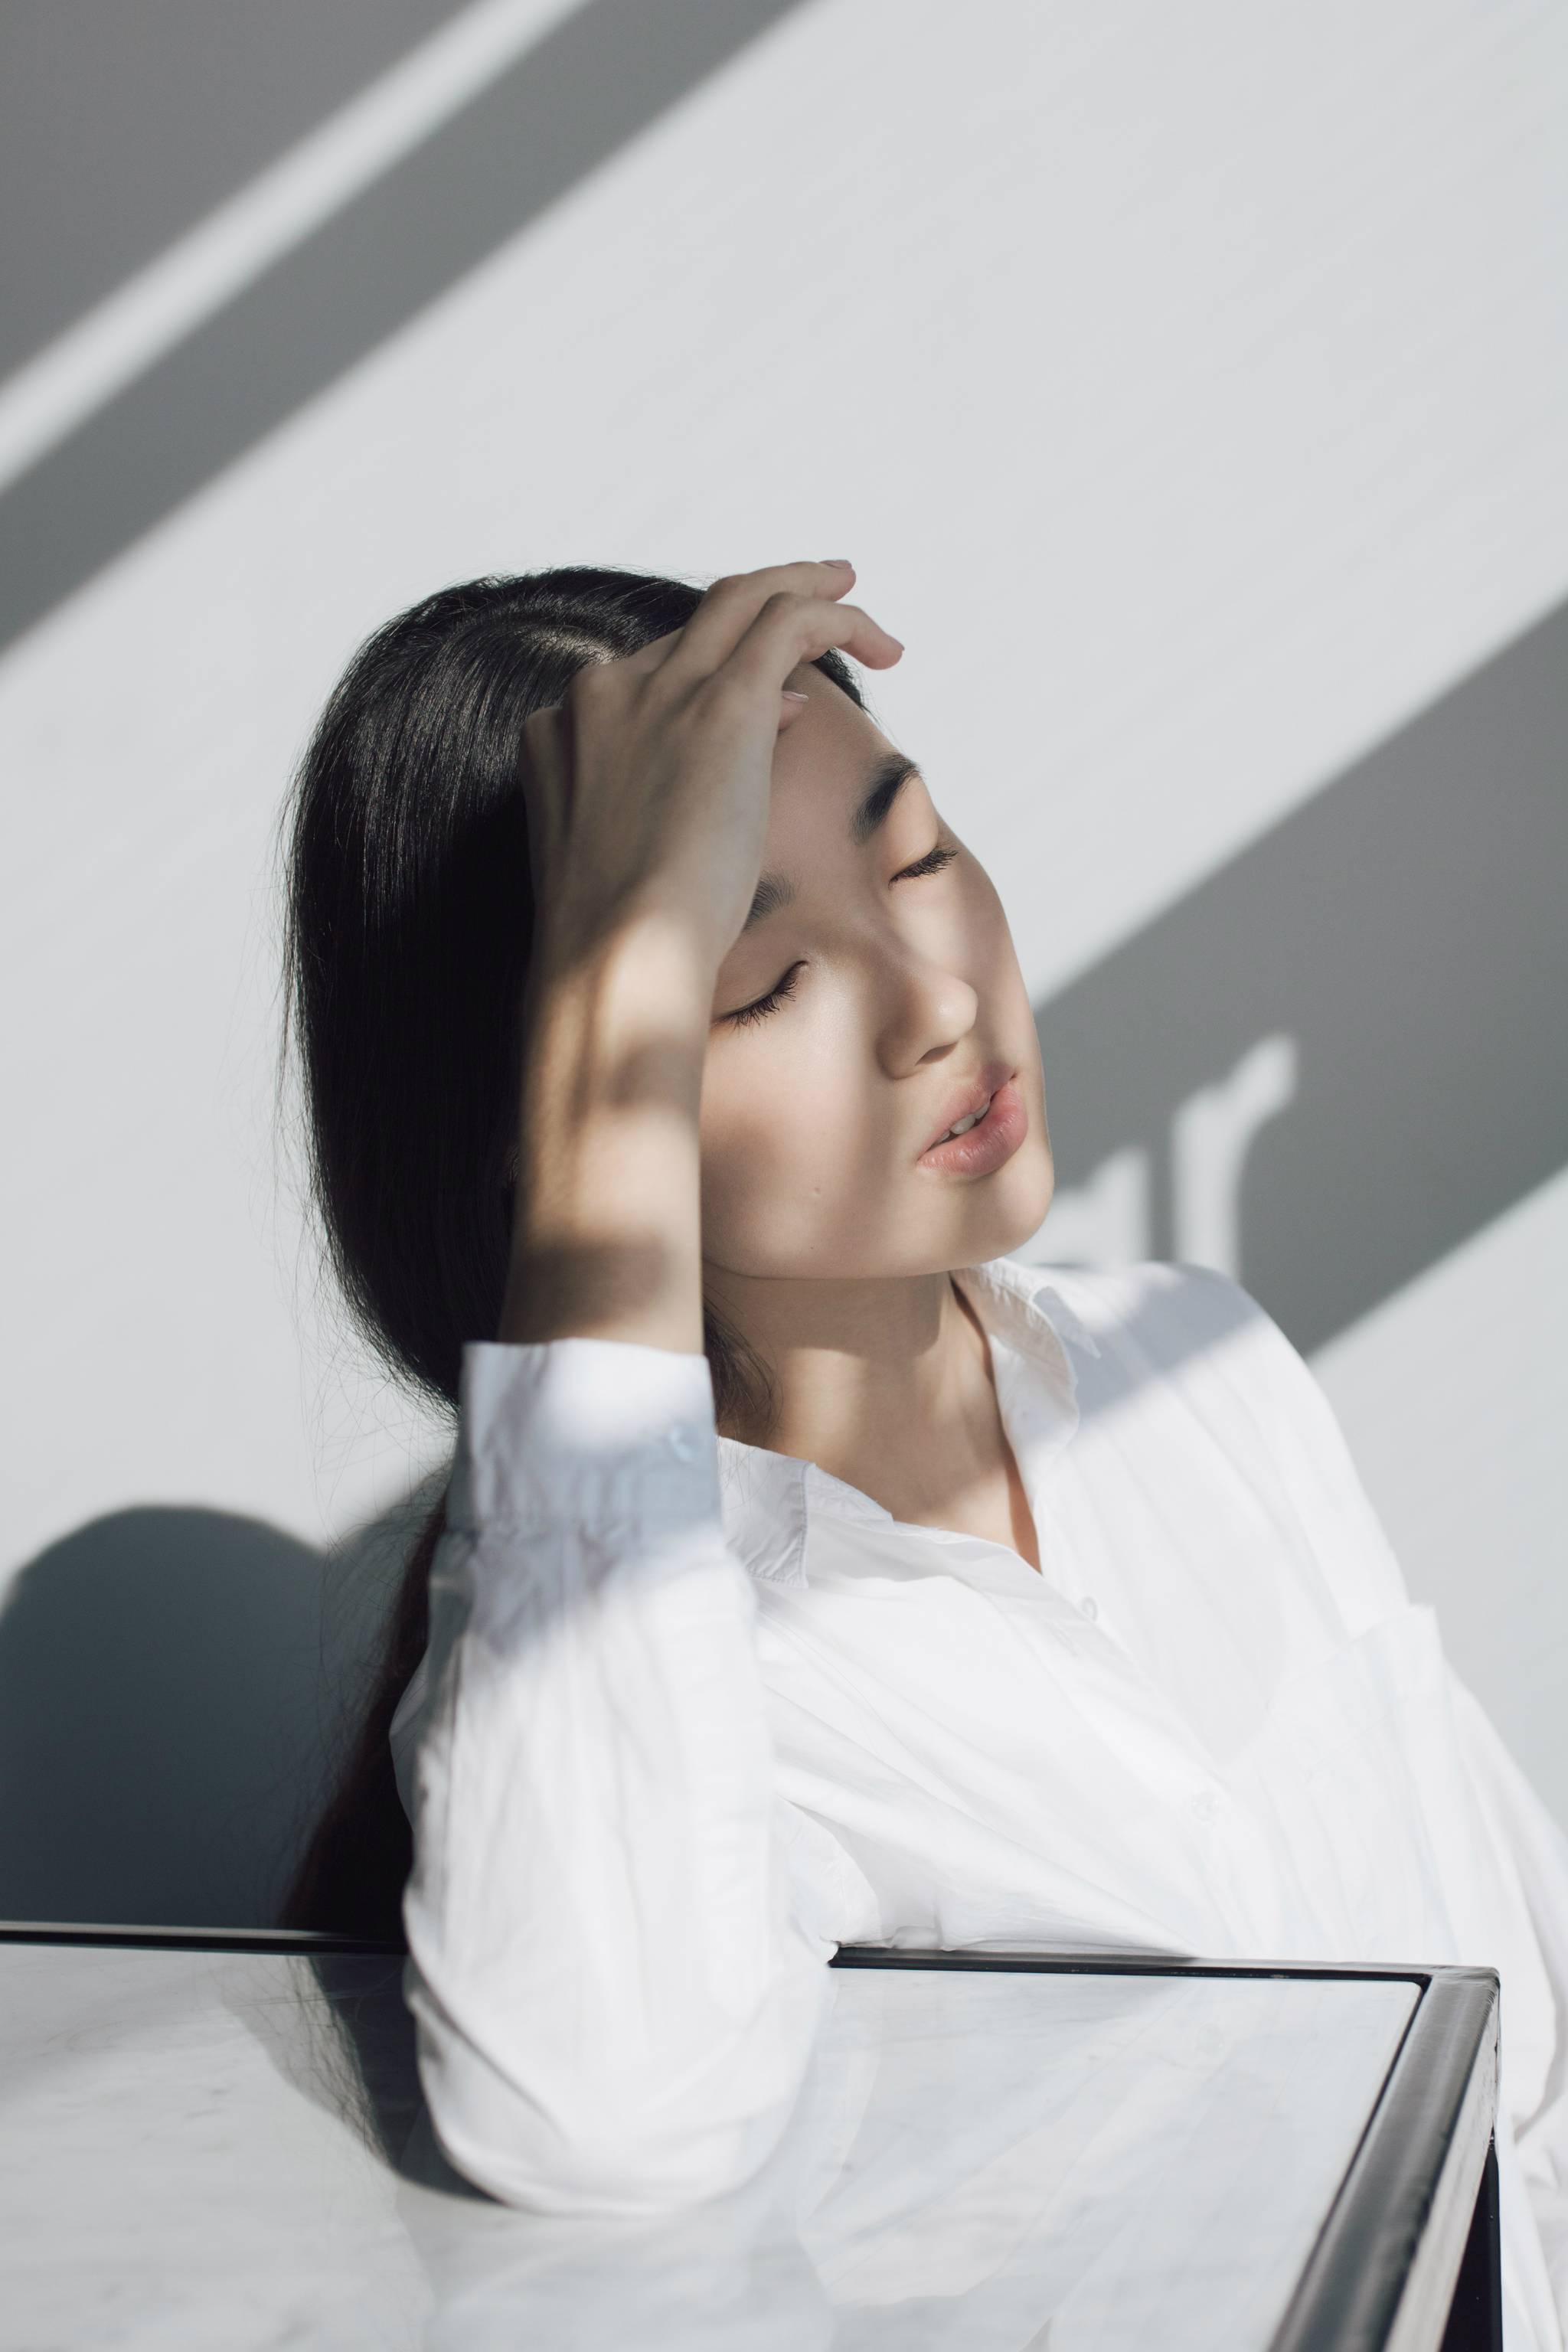 How South Korean women are resetting beauty ideals